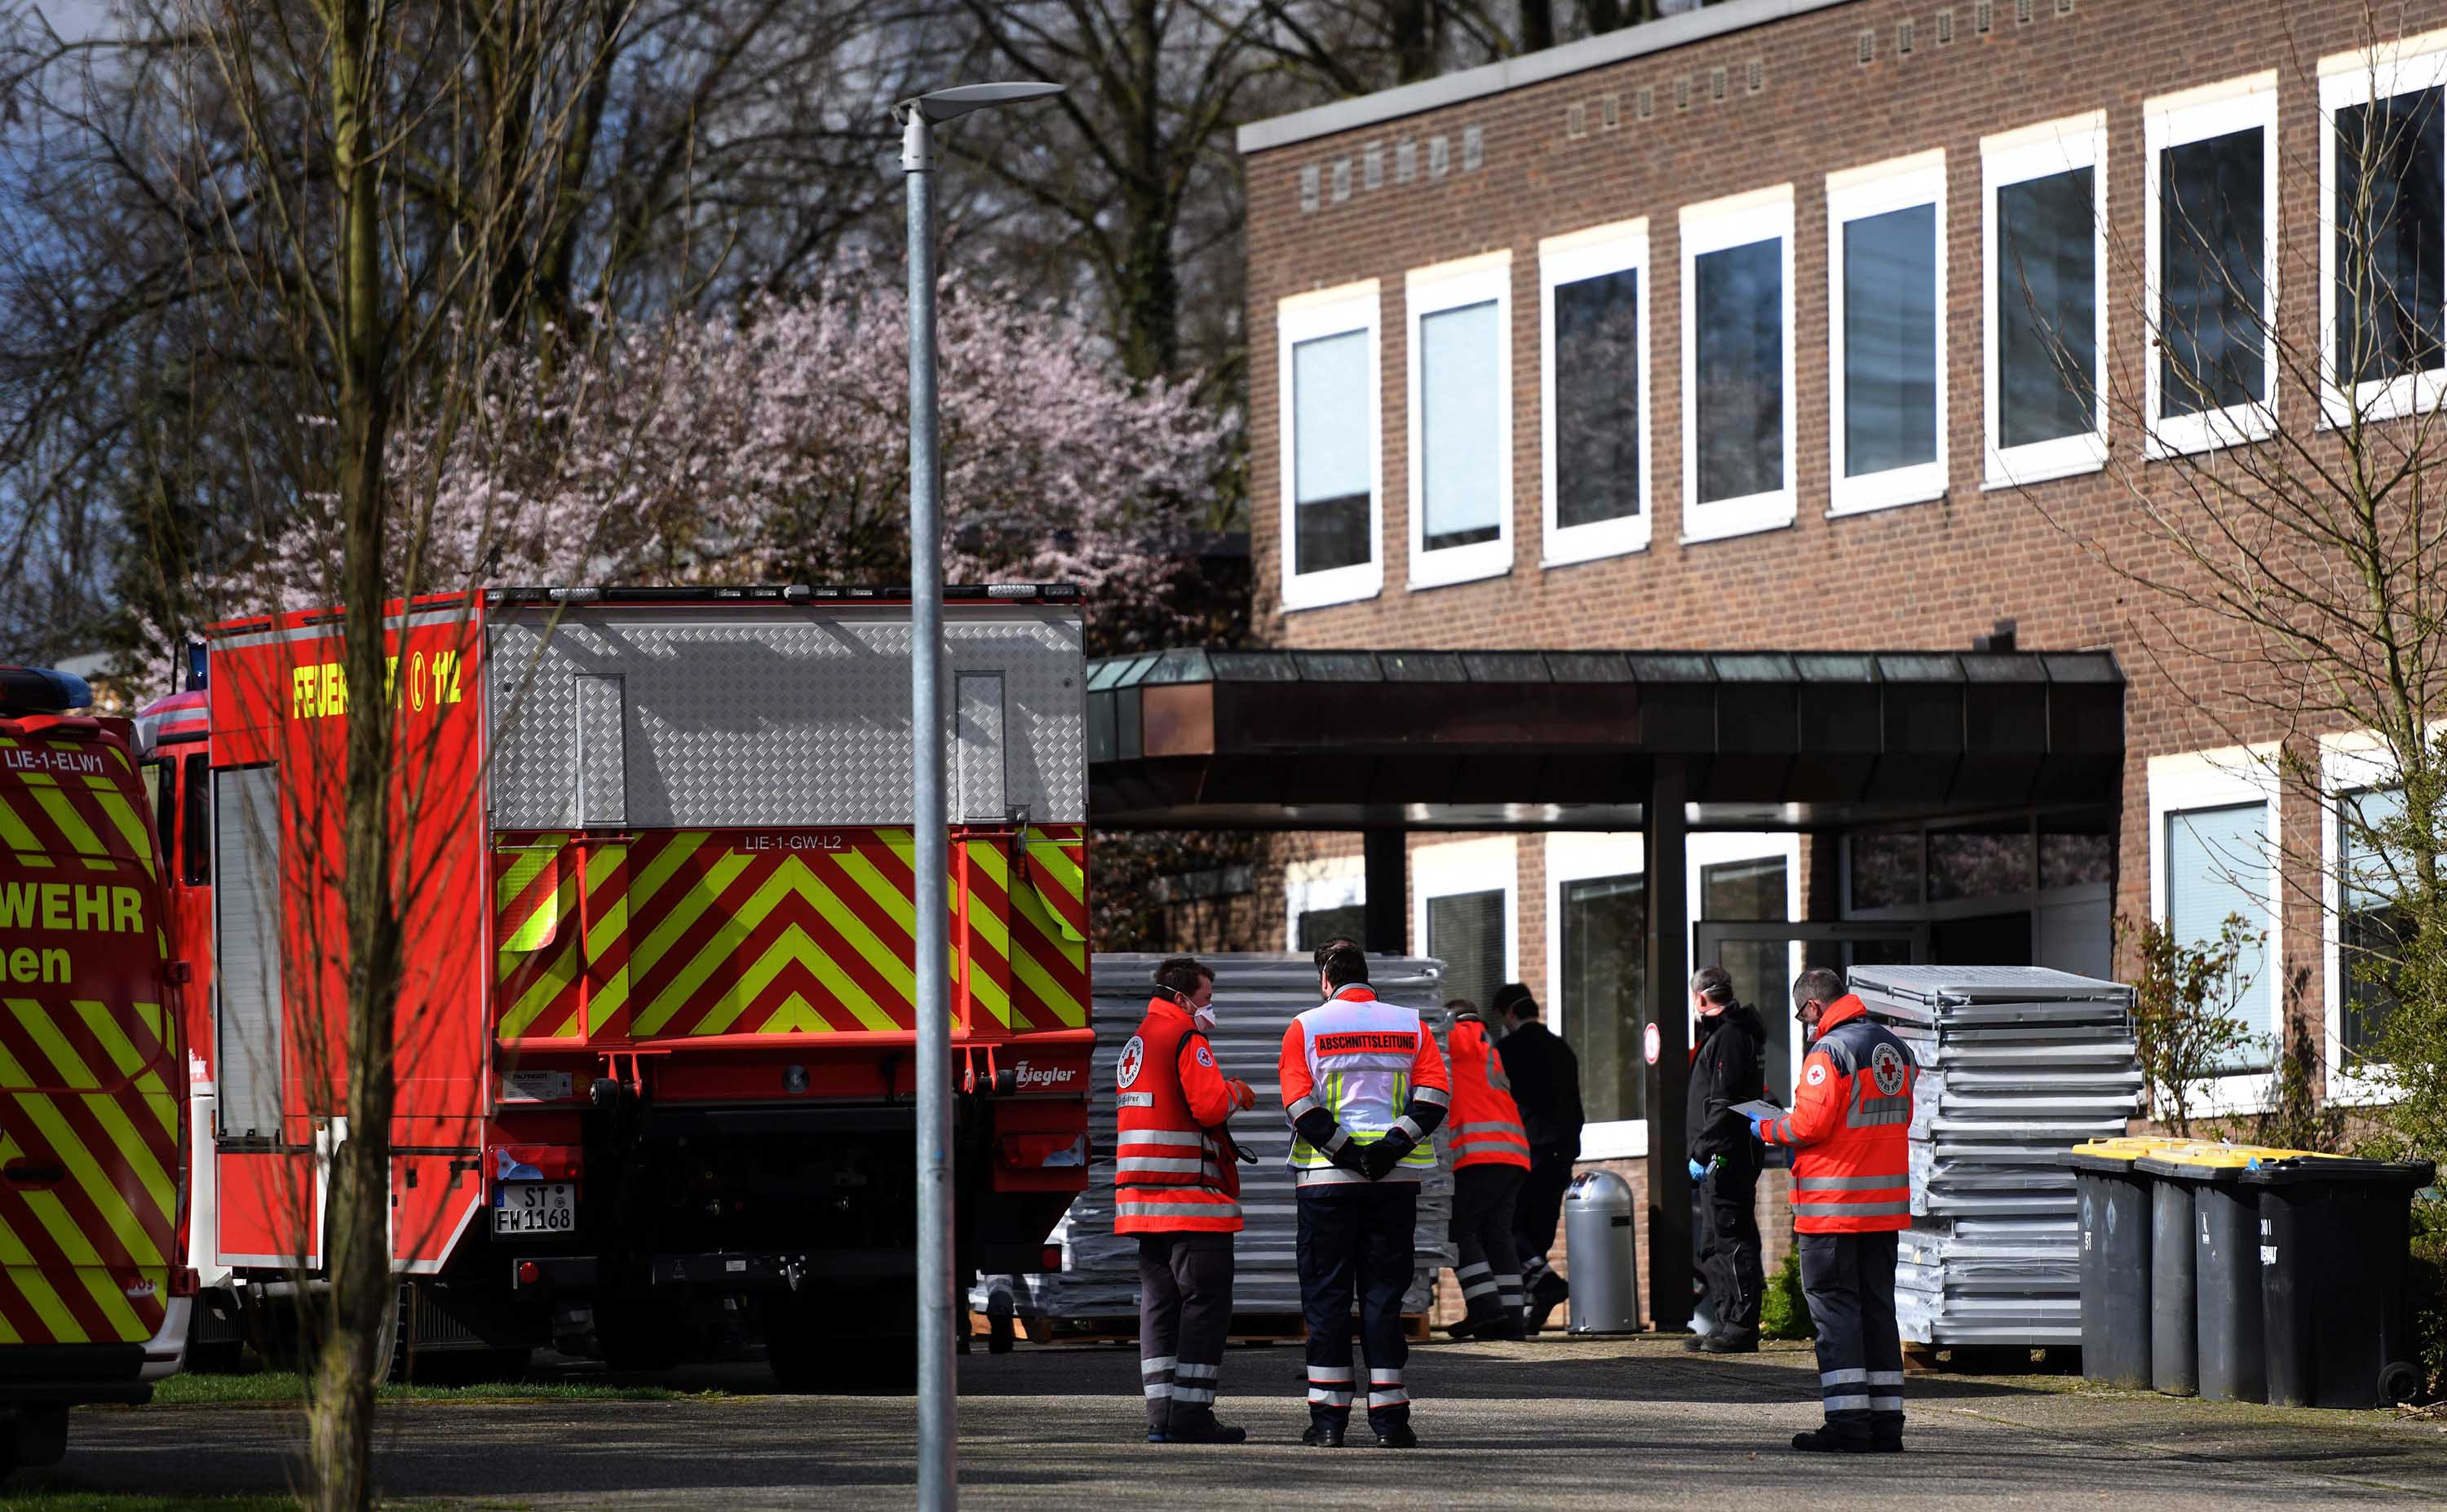 Volunteers transport beds into the former St. Marien hospital in Laer, Germany, on March 21, as the hospital prepares to treat coronavirus patients.